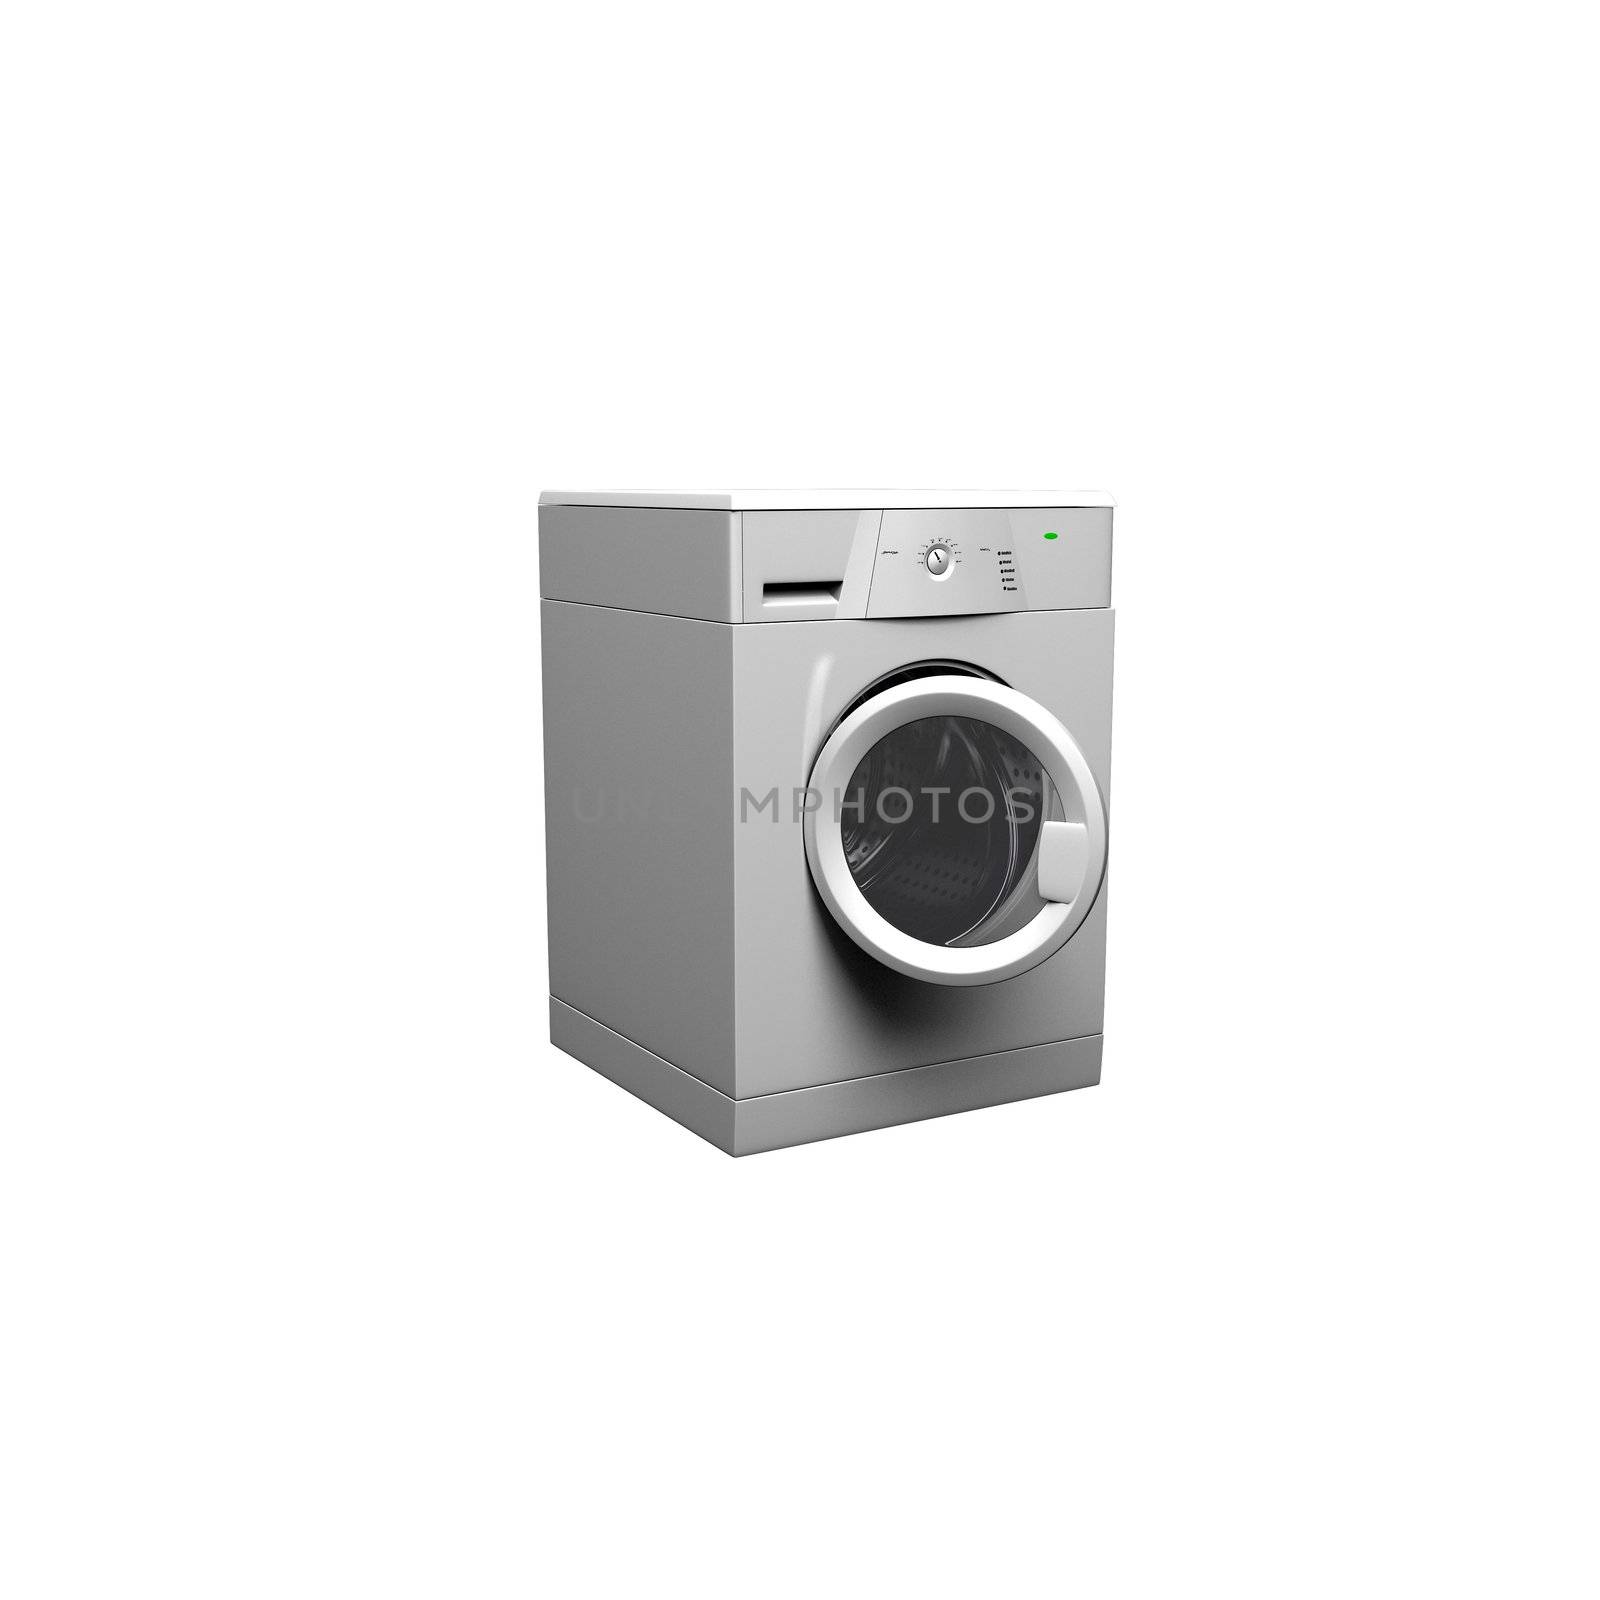 Washing machine on a white background. 3d illustration by ozaiachin